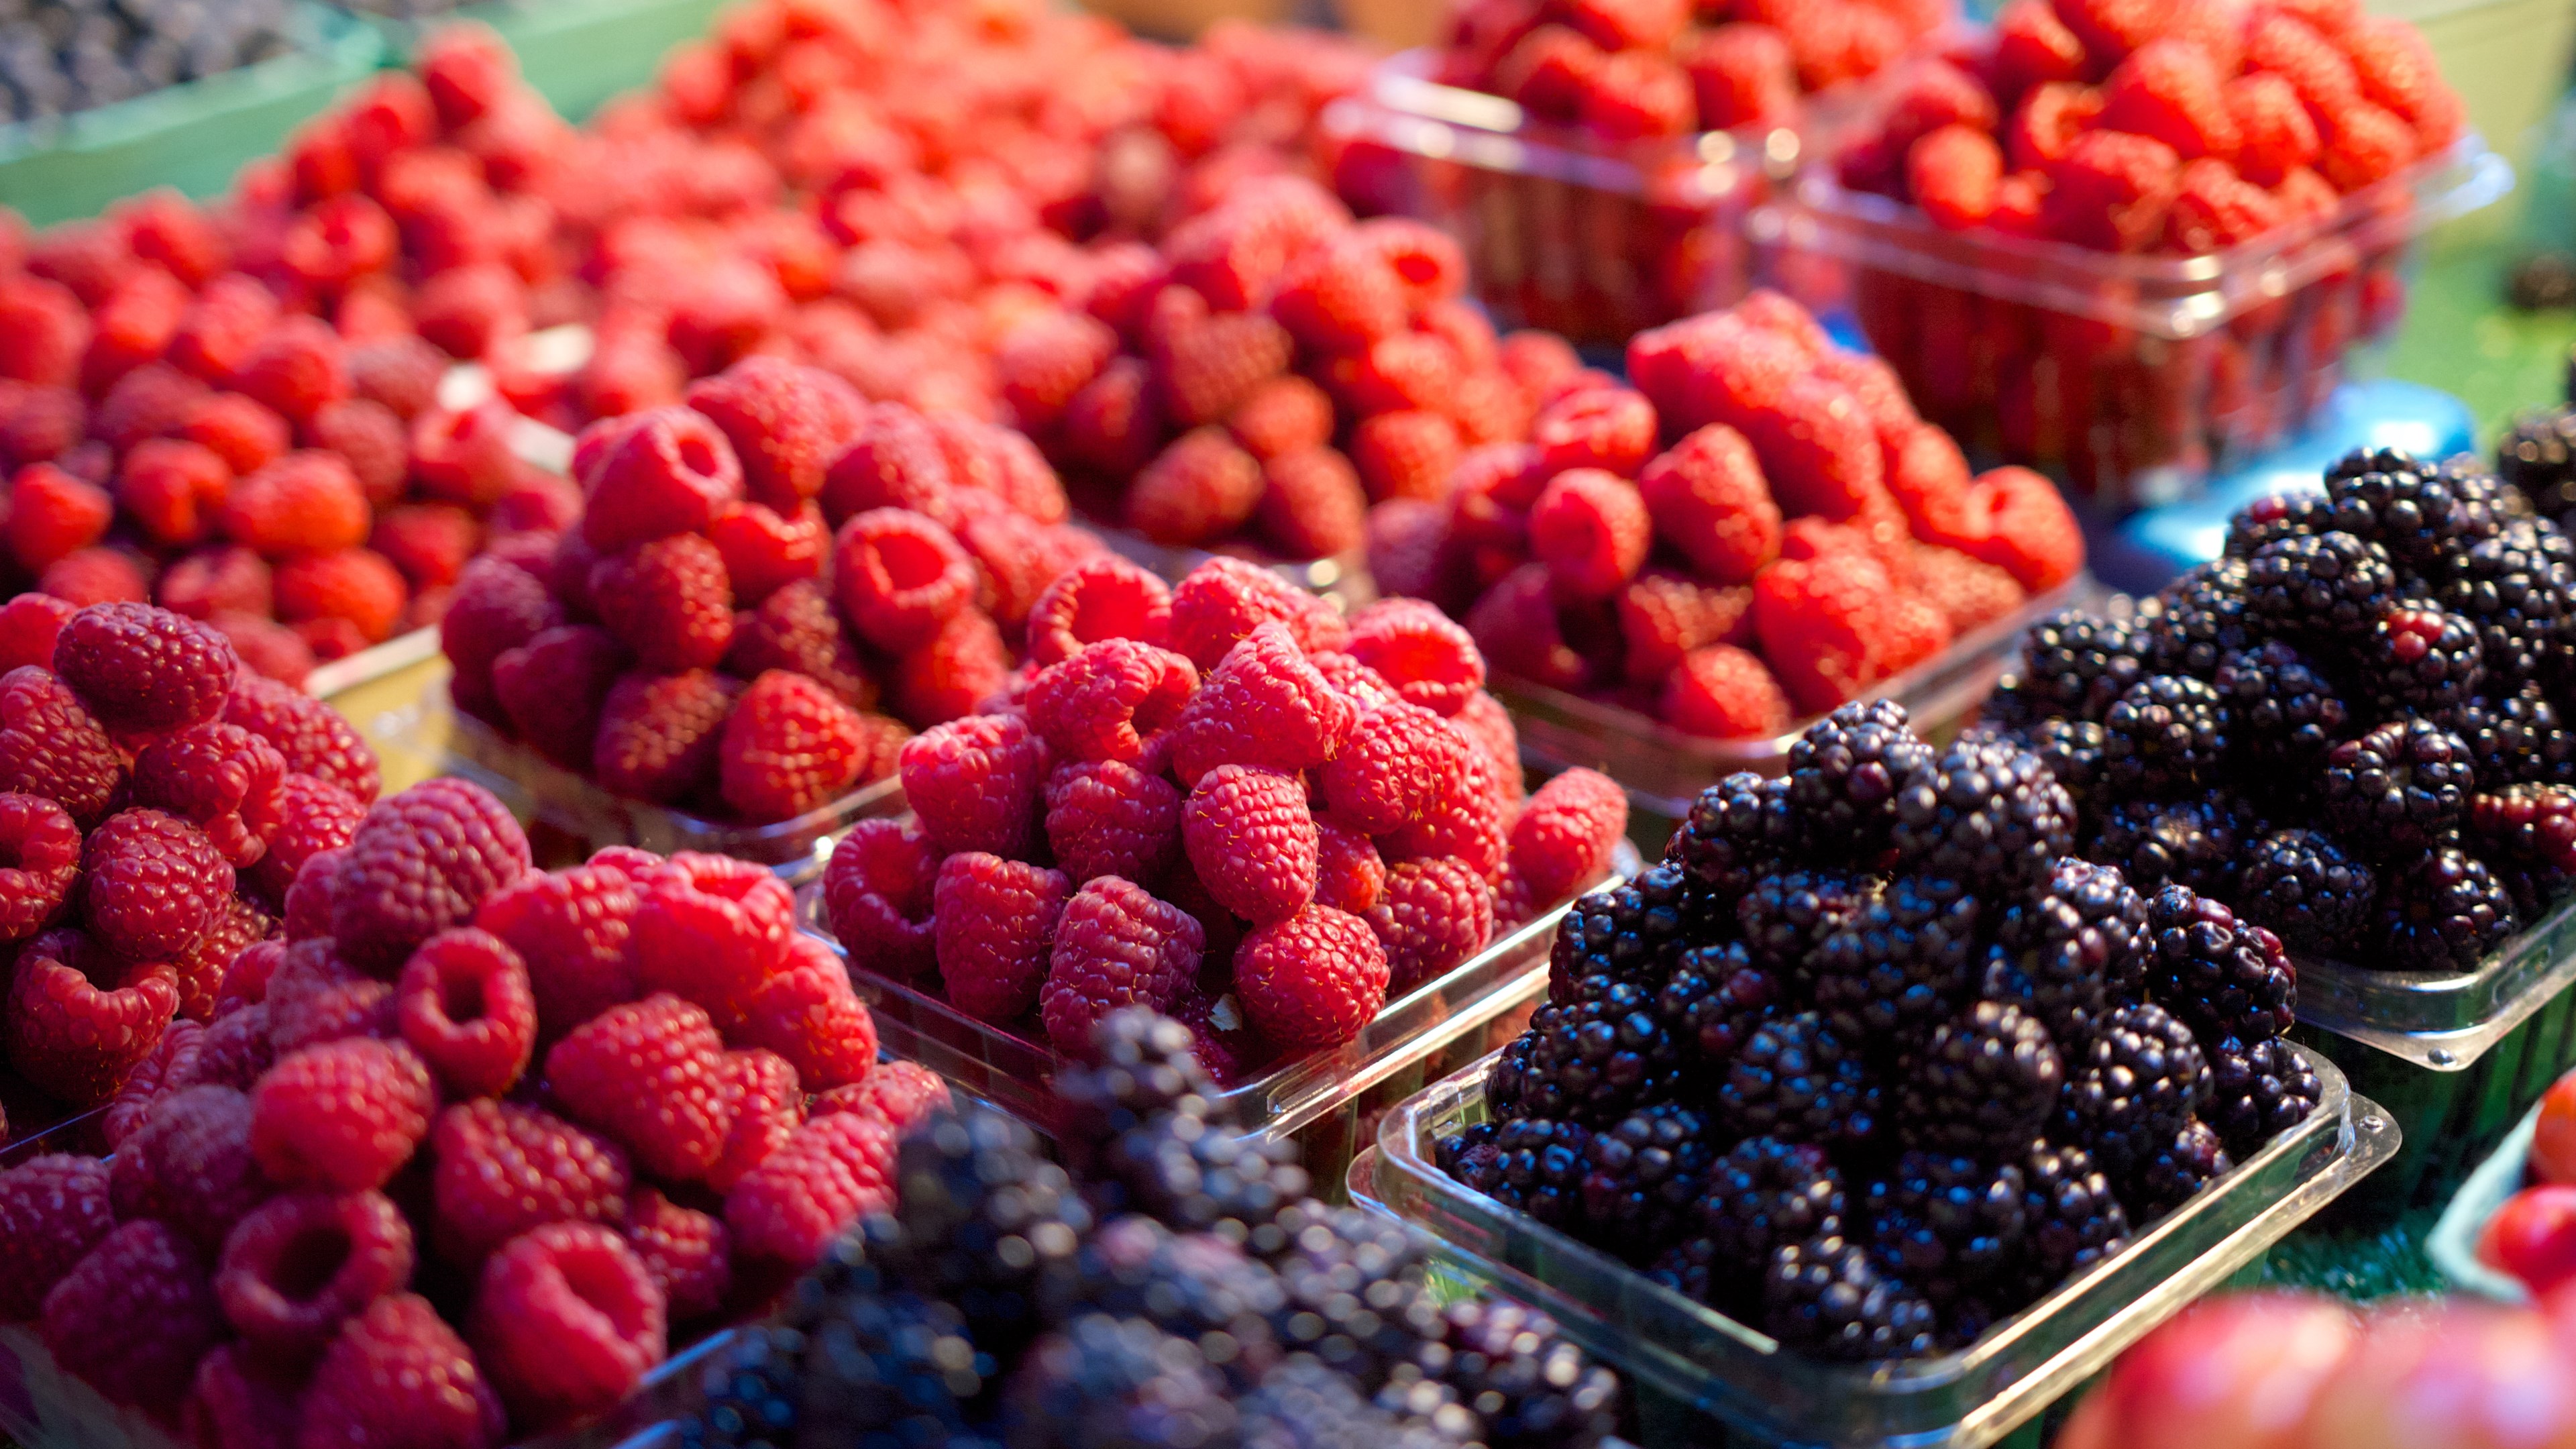 fresh market fruit makes an inexpensive summer treat. you can make homemade or semi-homemade pies, cobblers, and crisps.